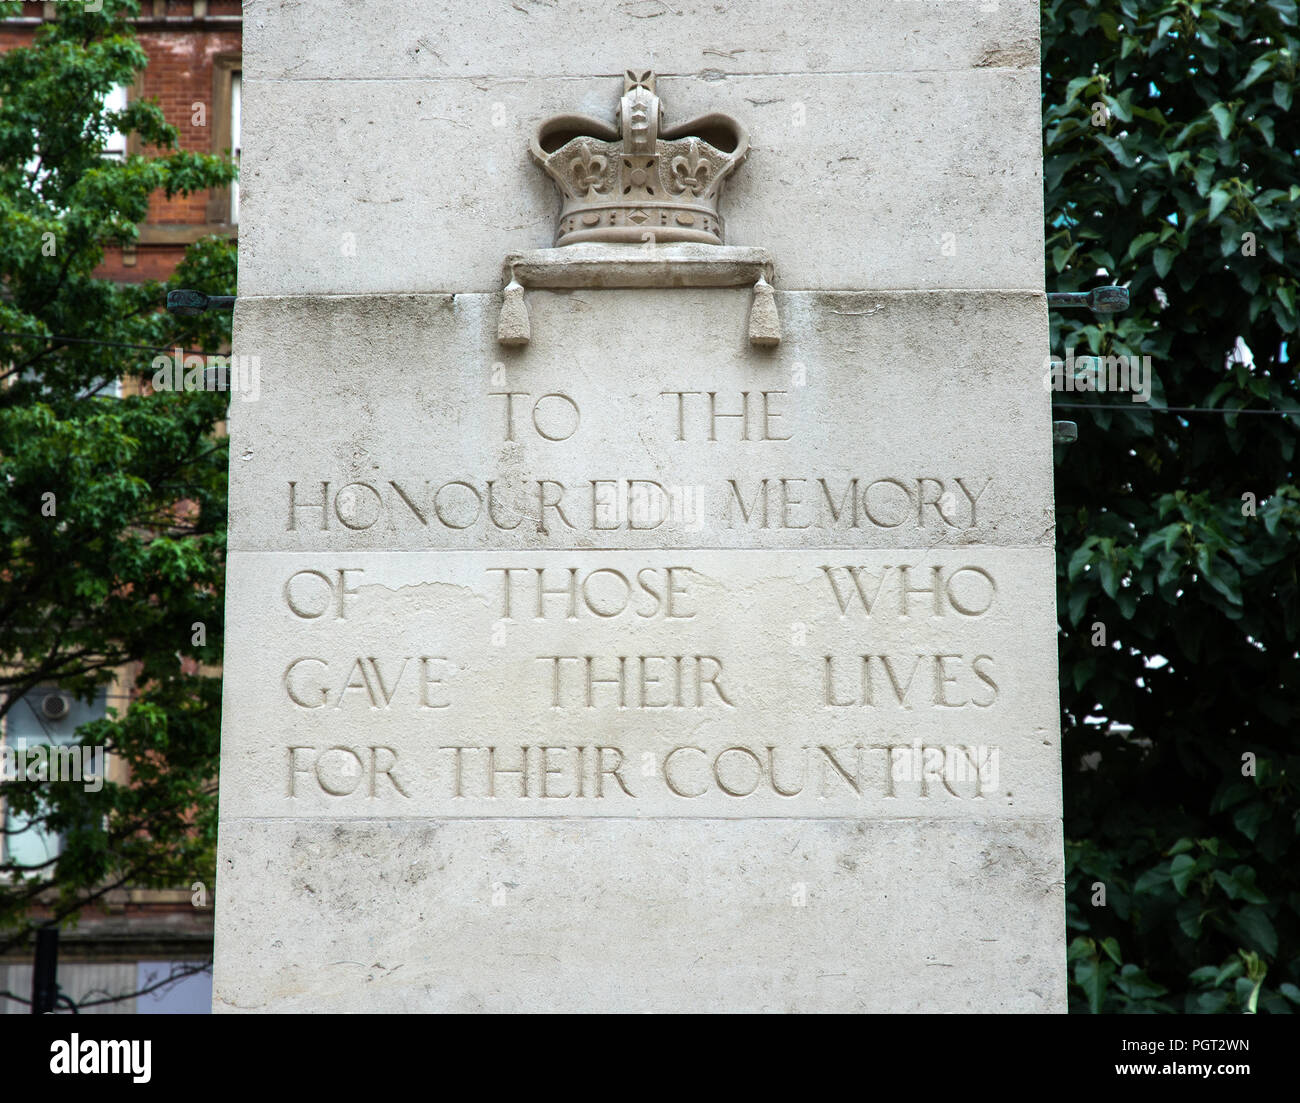 Central cenotaph Manchester war memorial showing crown and inscription reading TO THE HONOURED MEMORY OF THOSE WHO GAVE THEIR LIVES FOR THEIR COUNTRY Stock Photo